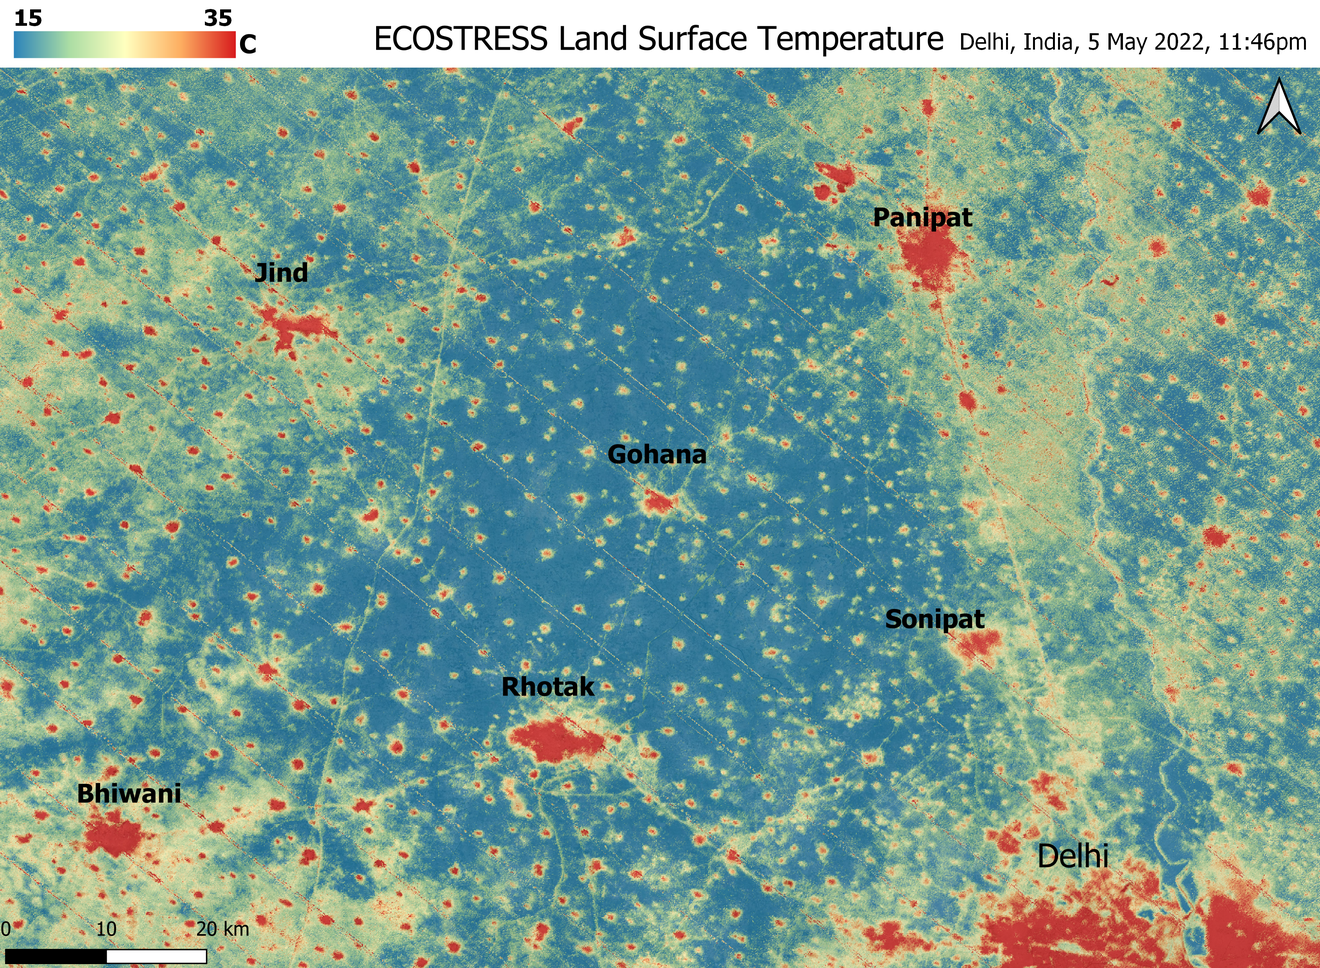 NASA: The 'heat islands' show urban areas are significantly warmer, even at night. 